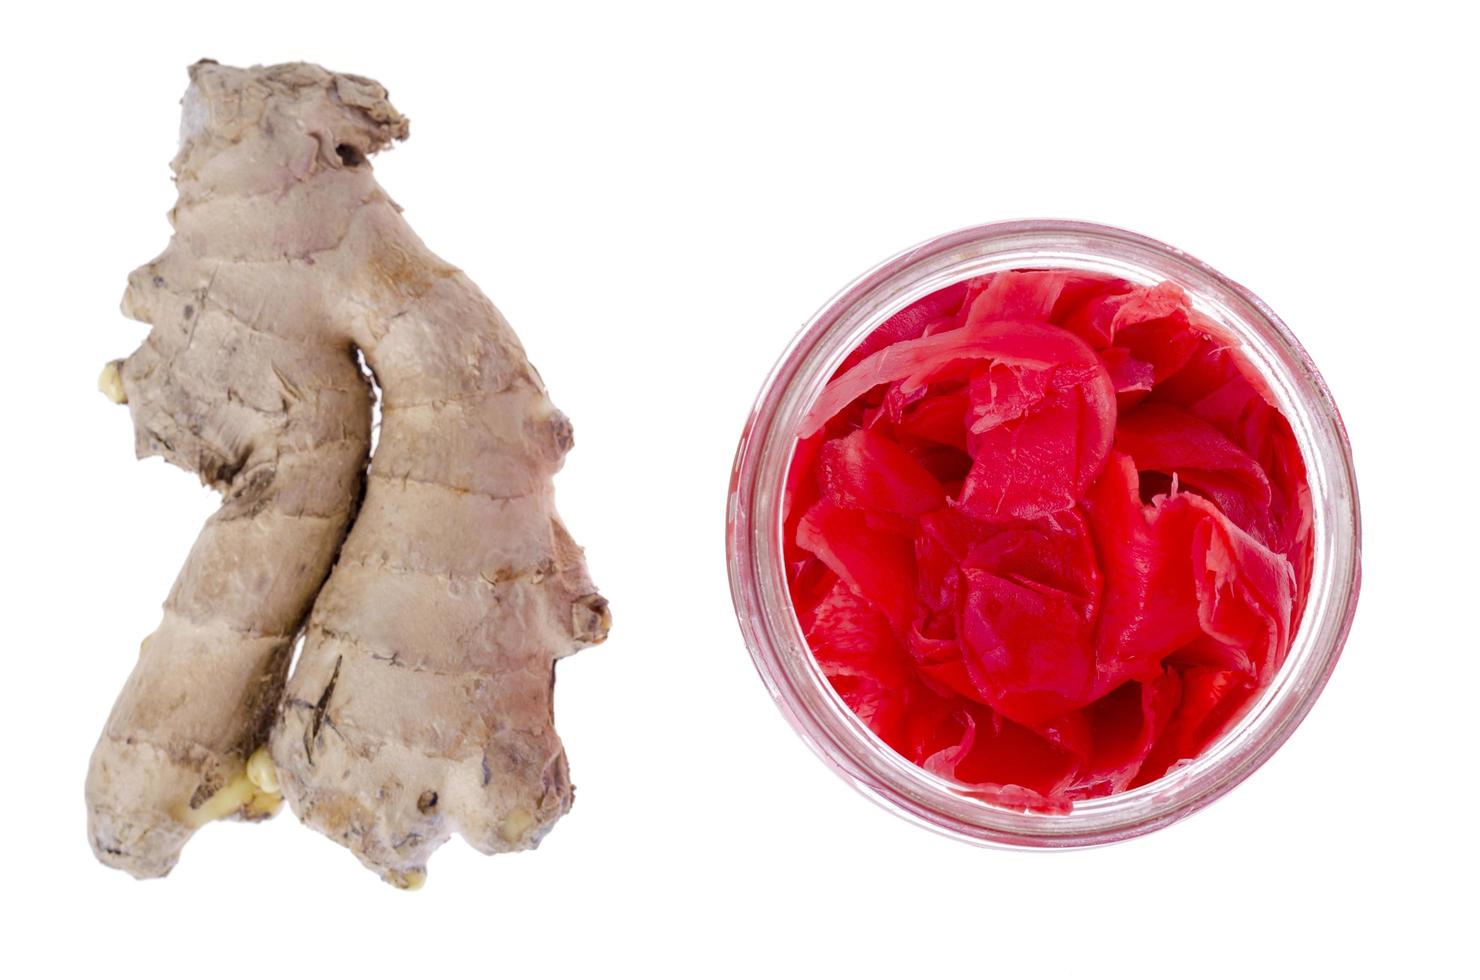 Fresh root and red pickled ginger. Photo